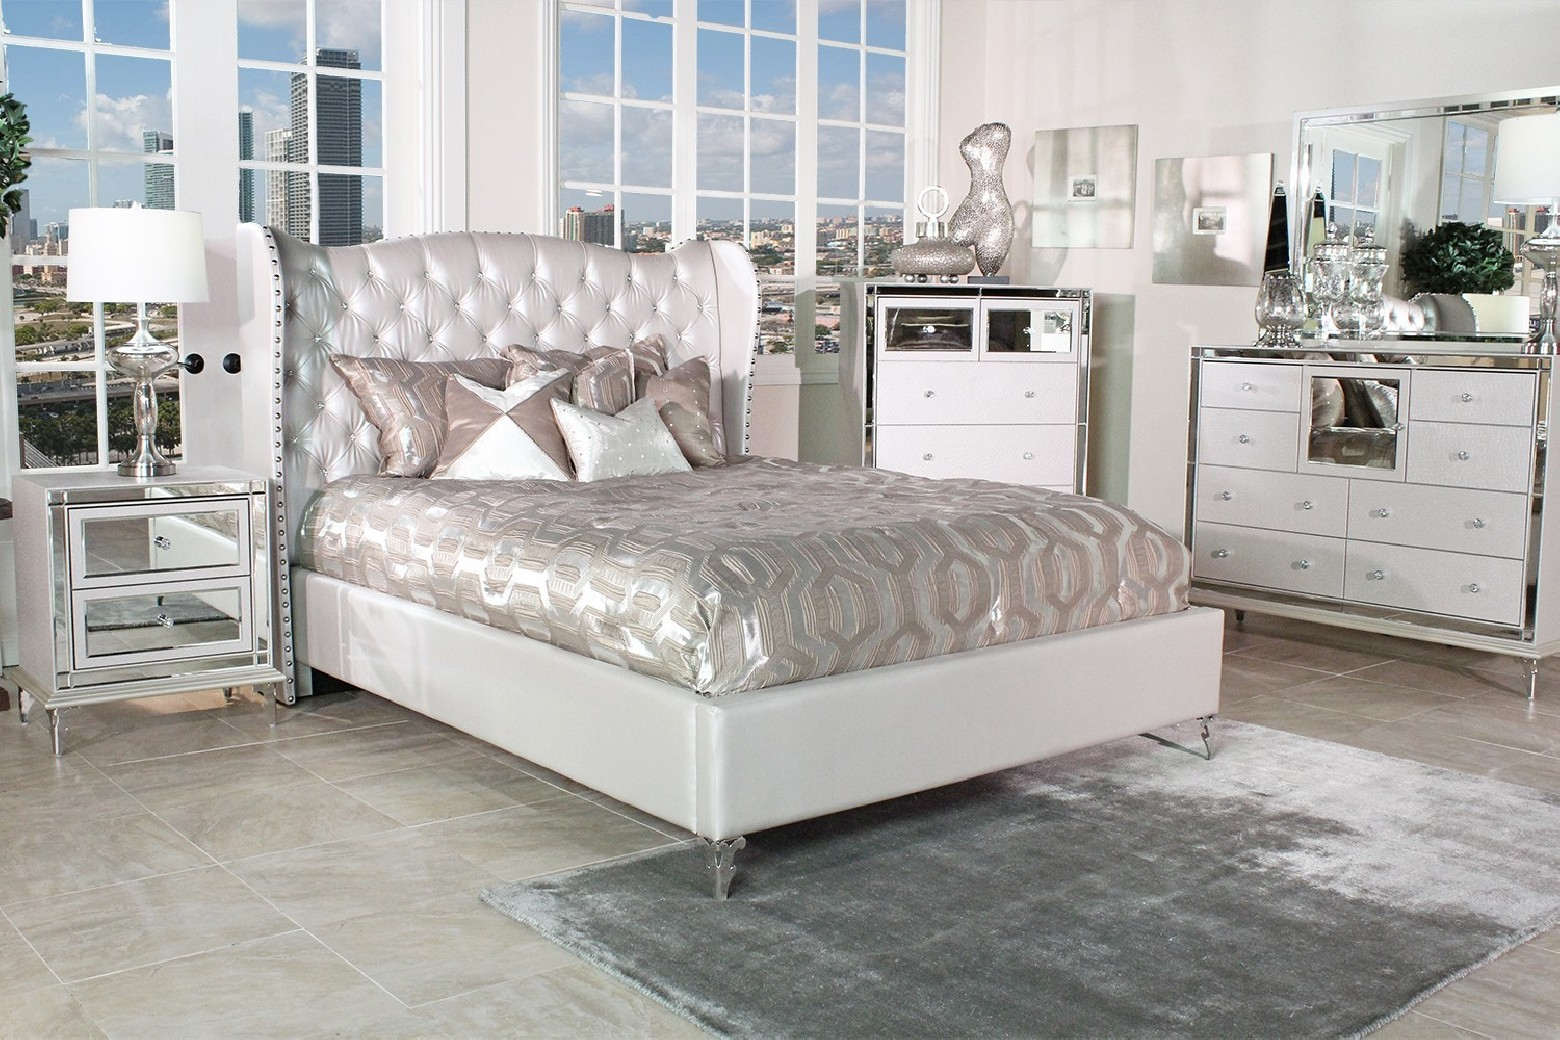 Aico Hollywood Loft Bedroom Set Collection With Upholstered Platform Bed within dimensions 1560 X 1040